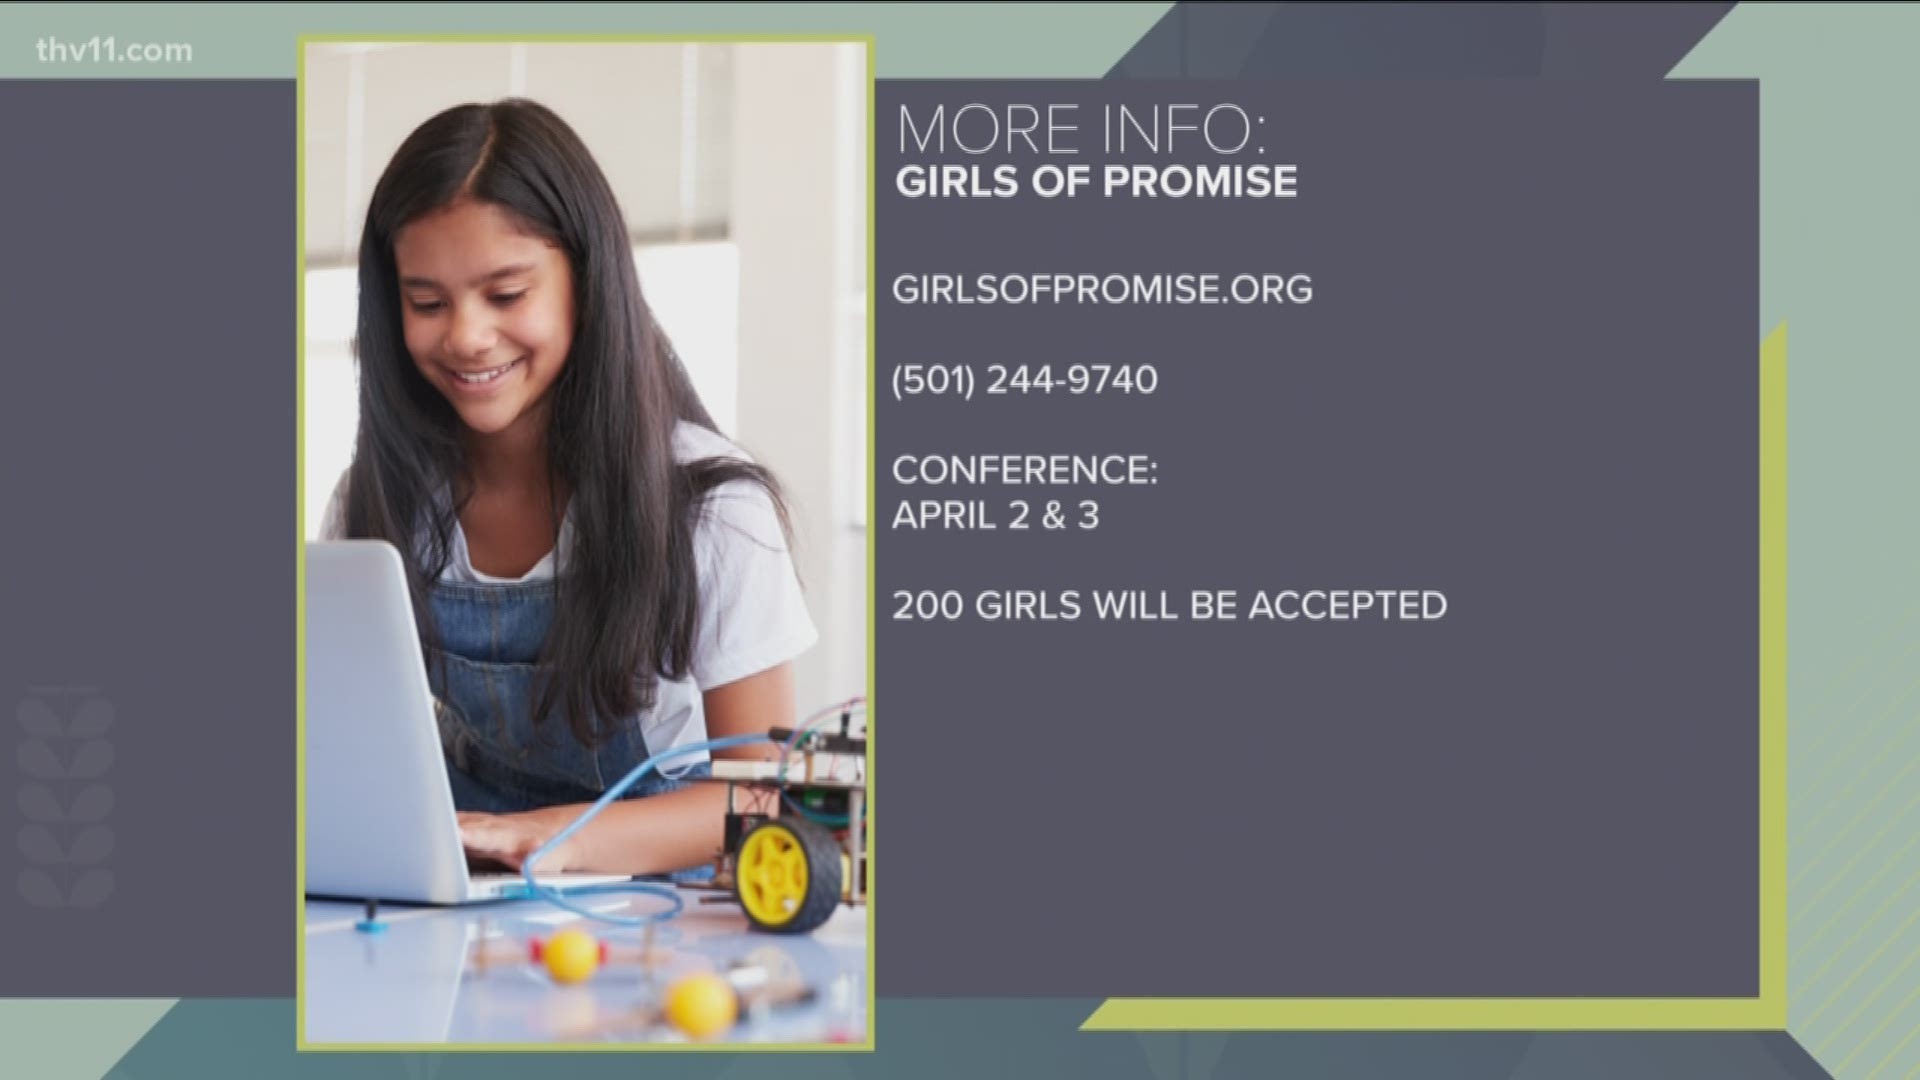 Inspire girls to go after their dreams in the fields of science, technology, engineering, arts, or math.